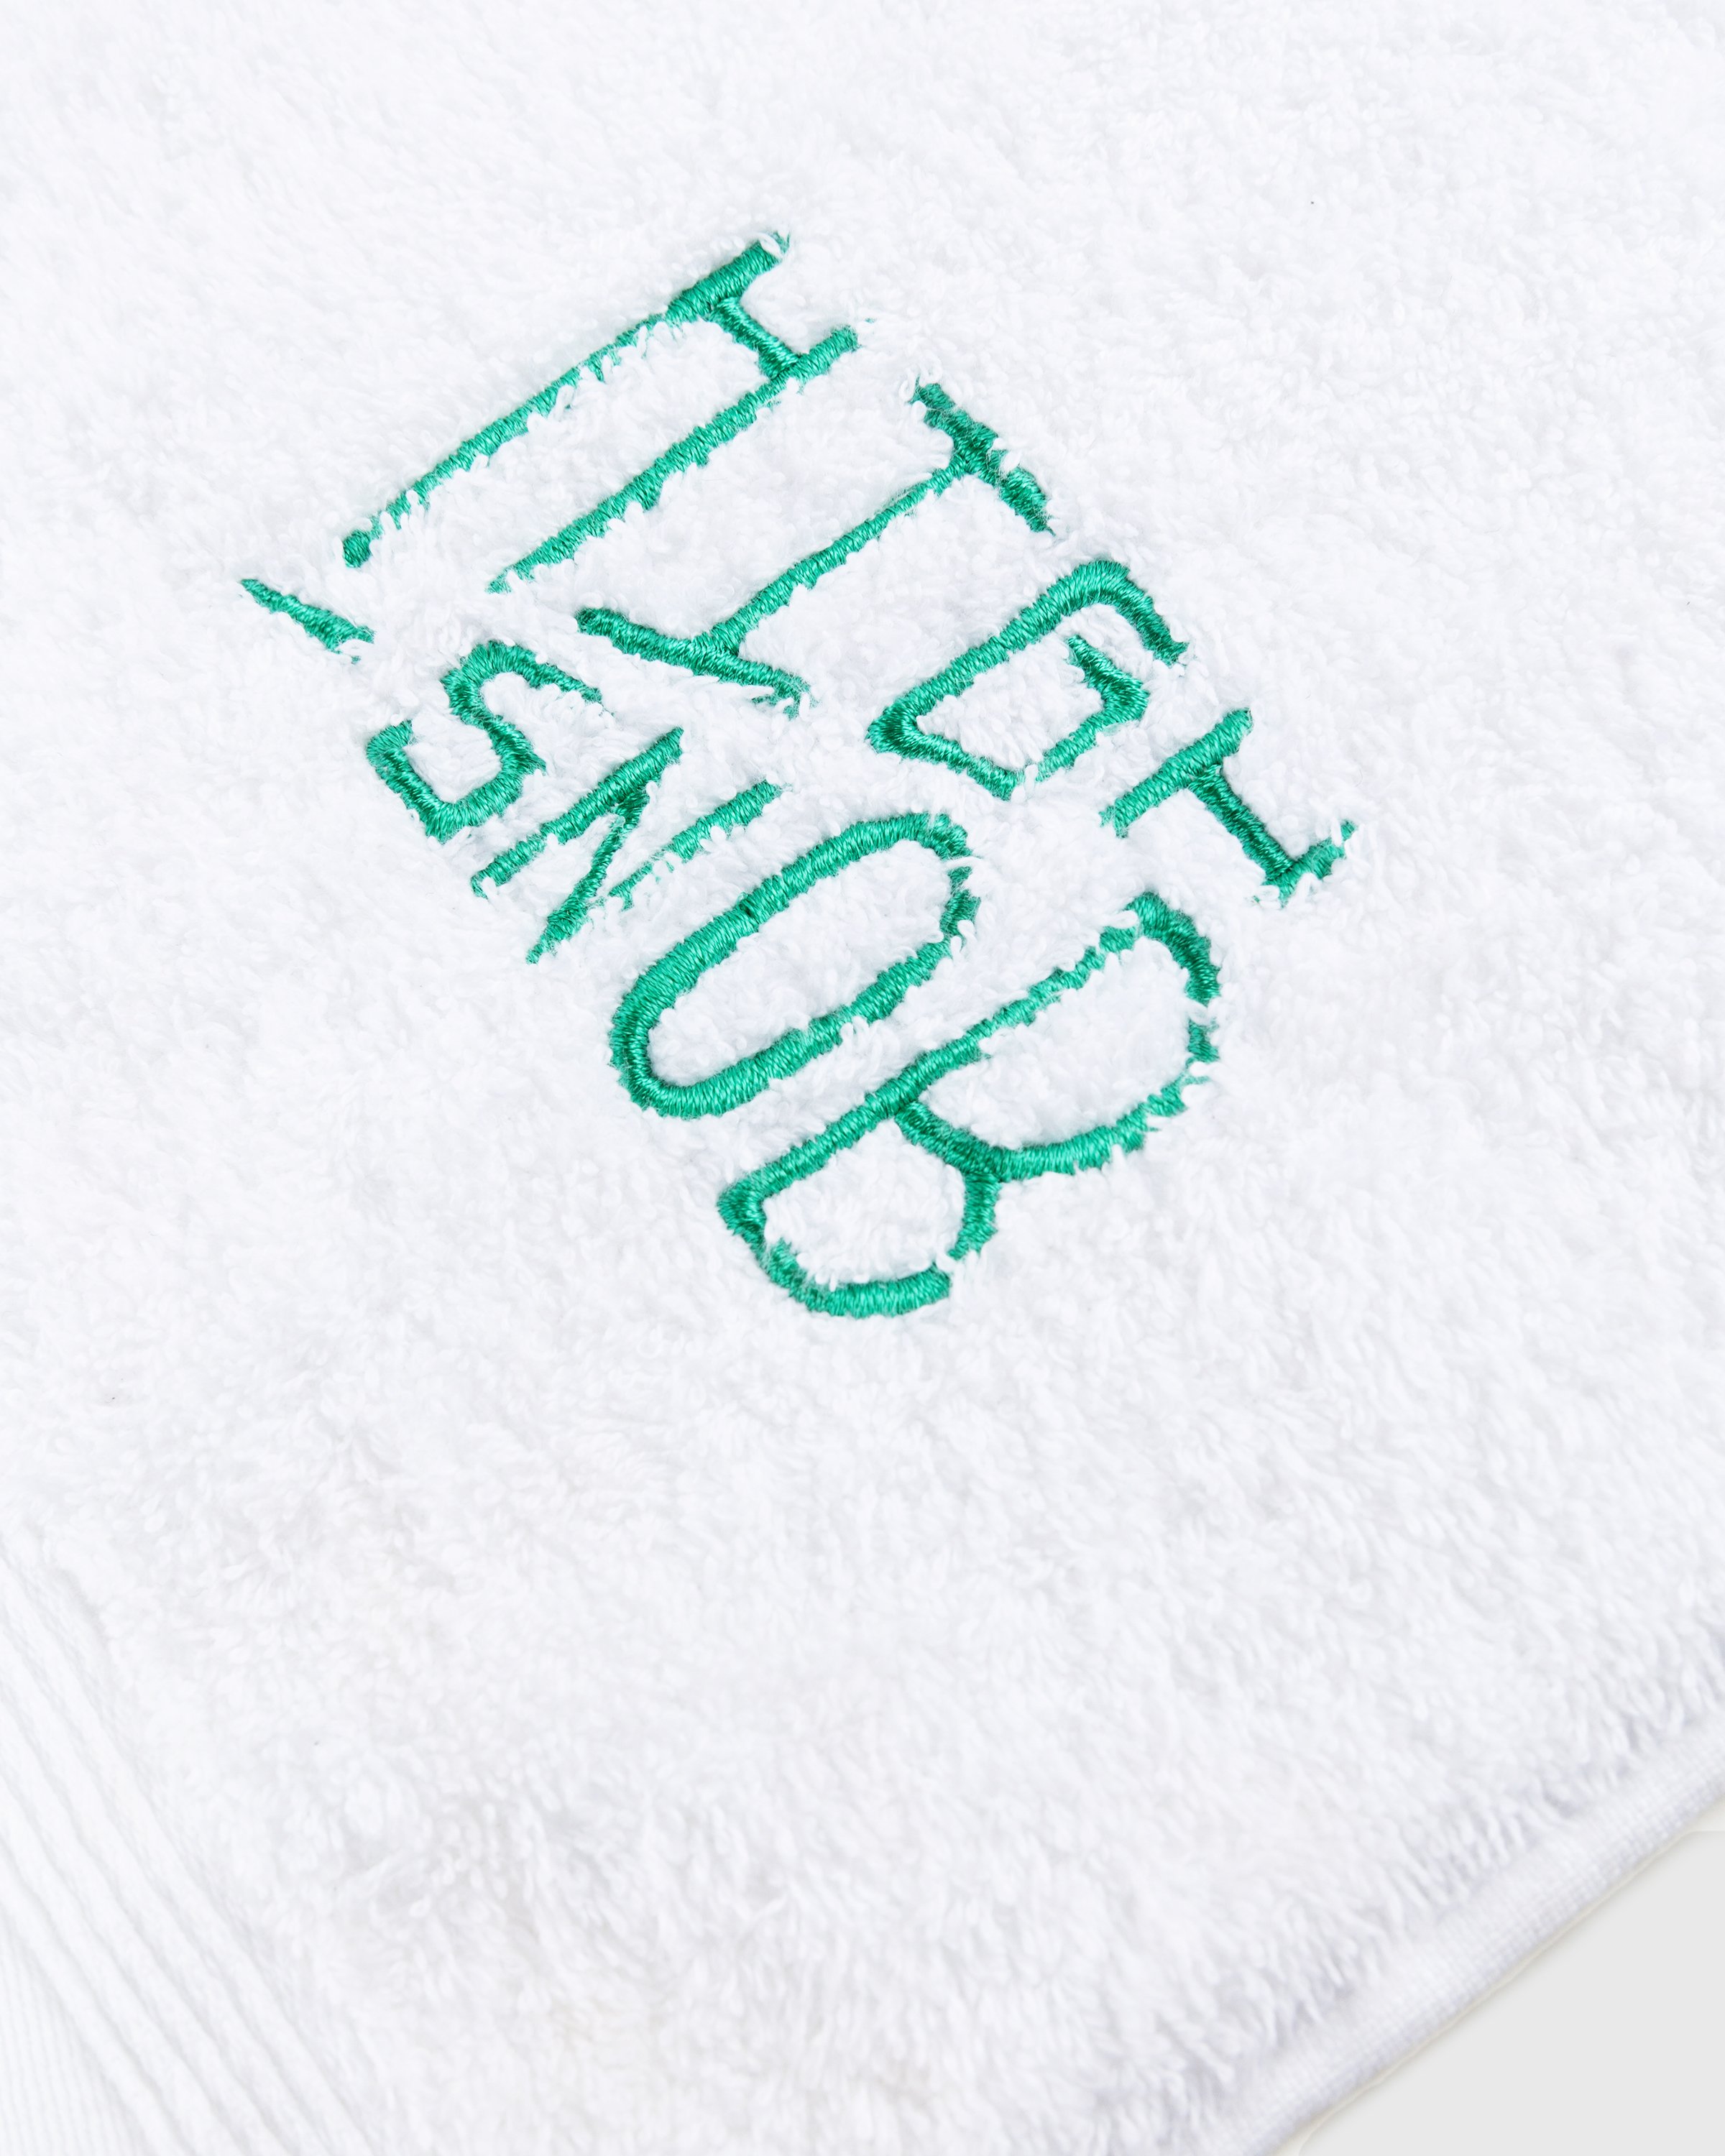 Hotel Amour x Highsnobiety - Not In Paris 4 Towel White - Lifestyle - White - Image 4